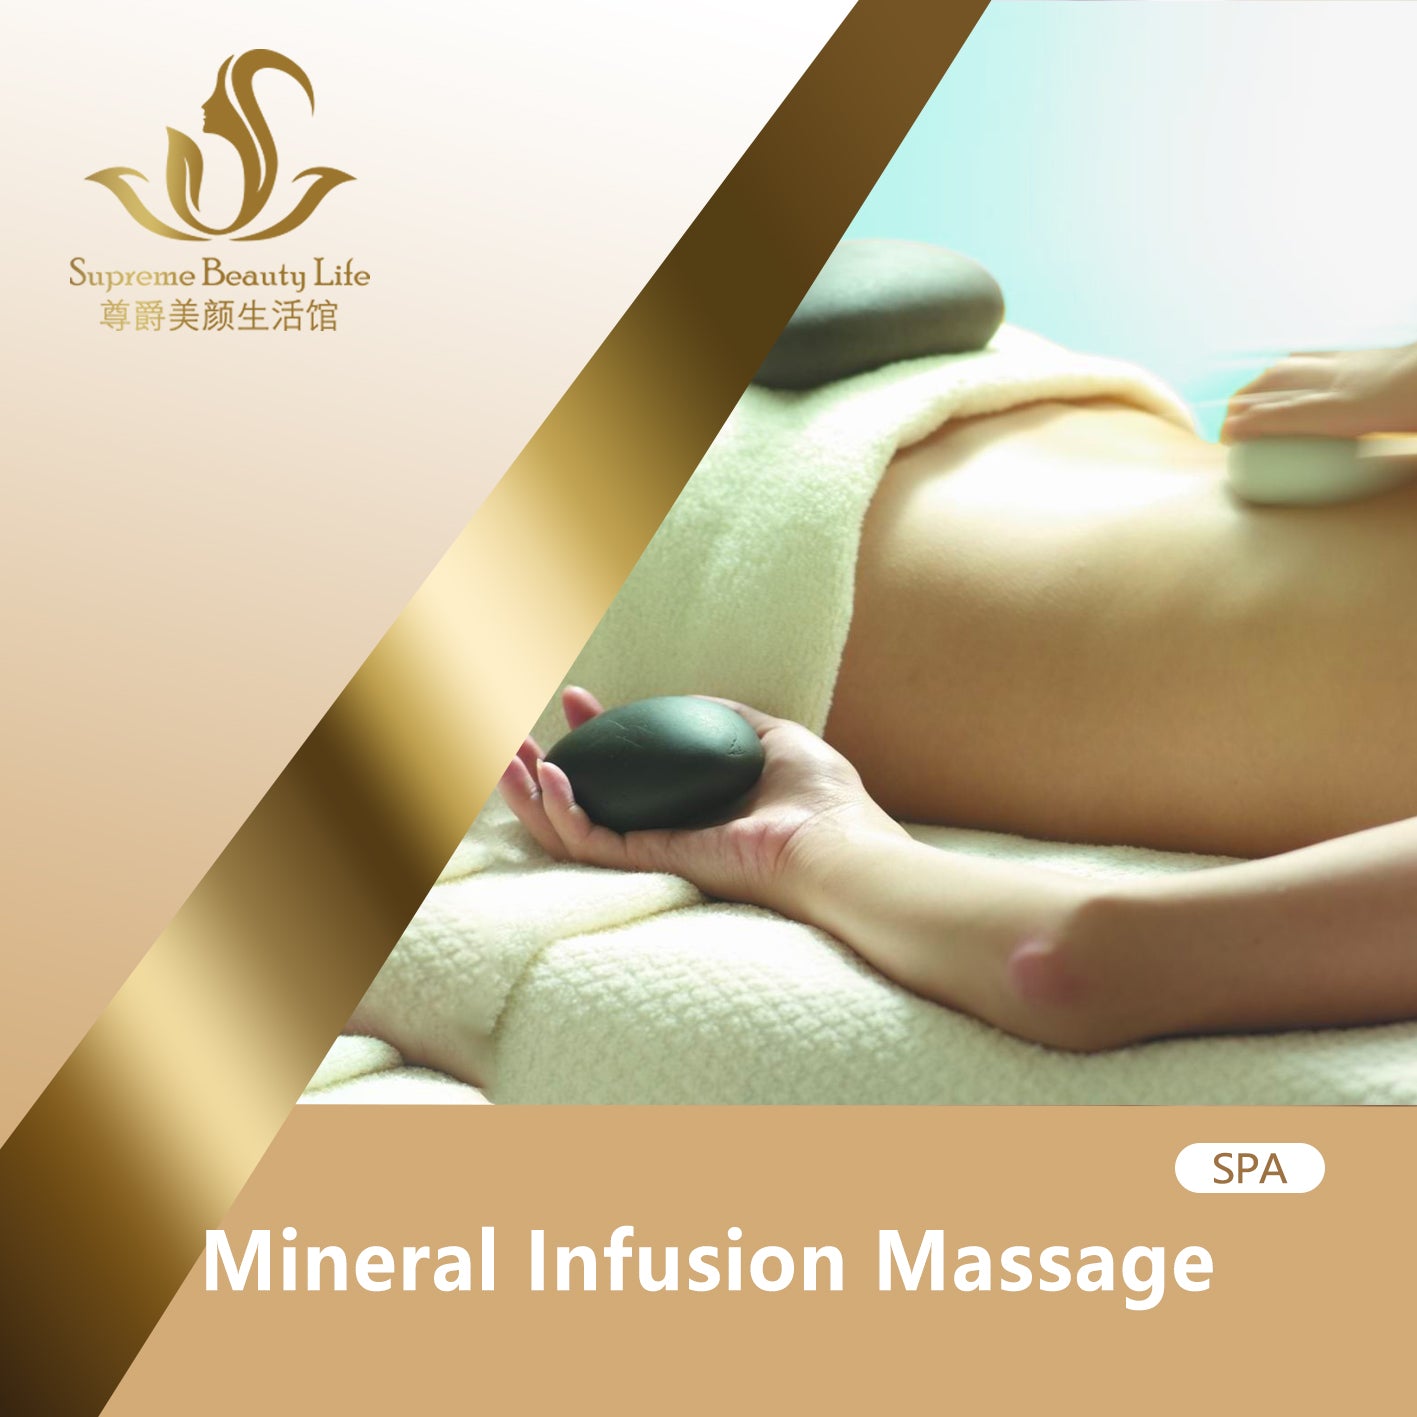 Mineral Infusion Massage